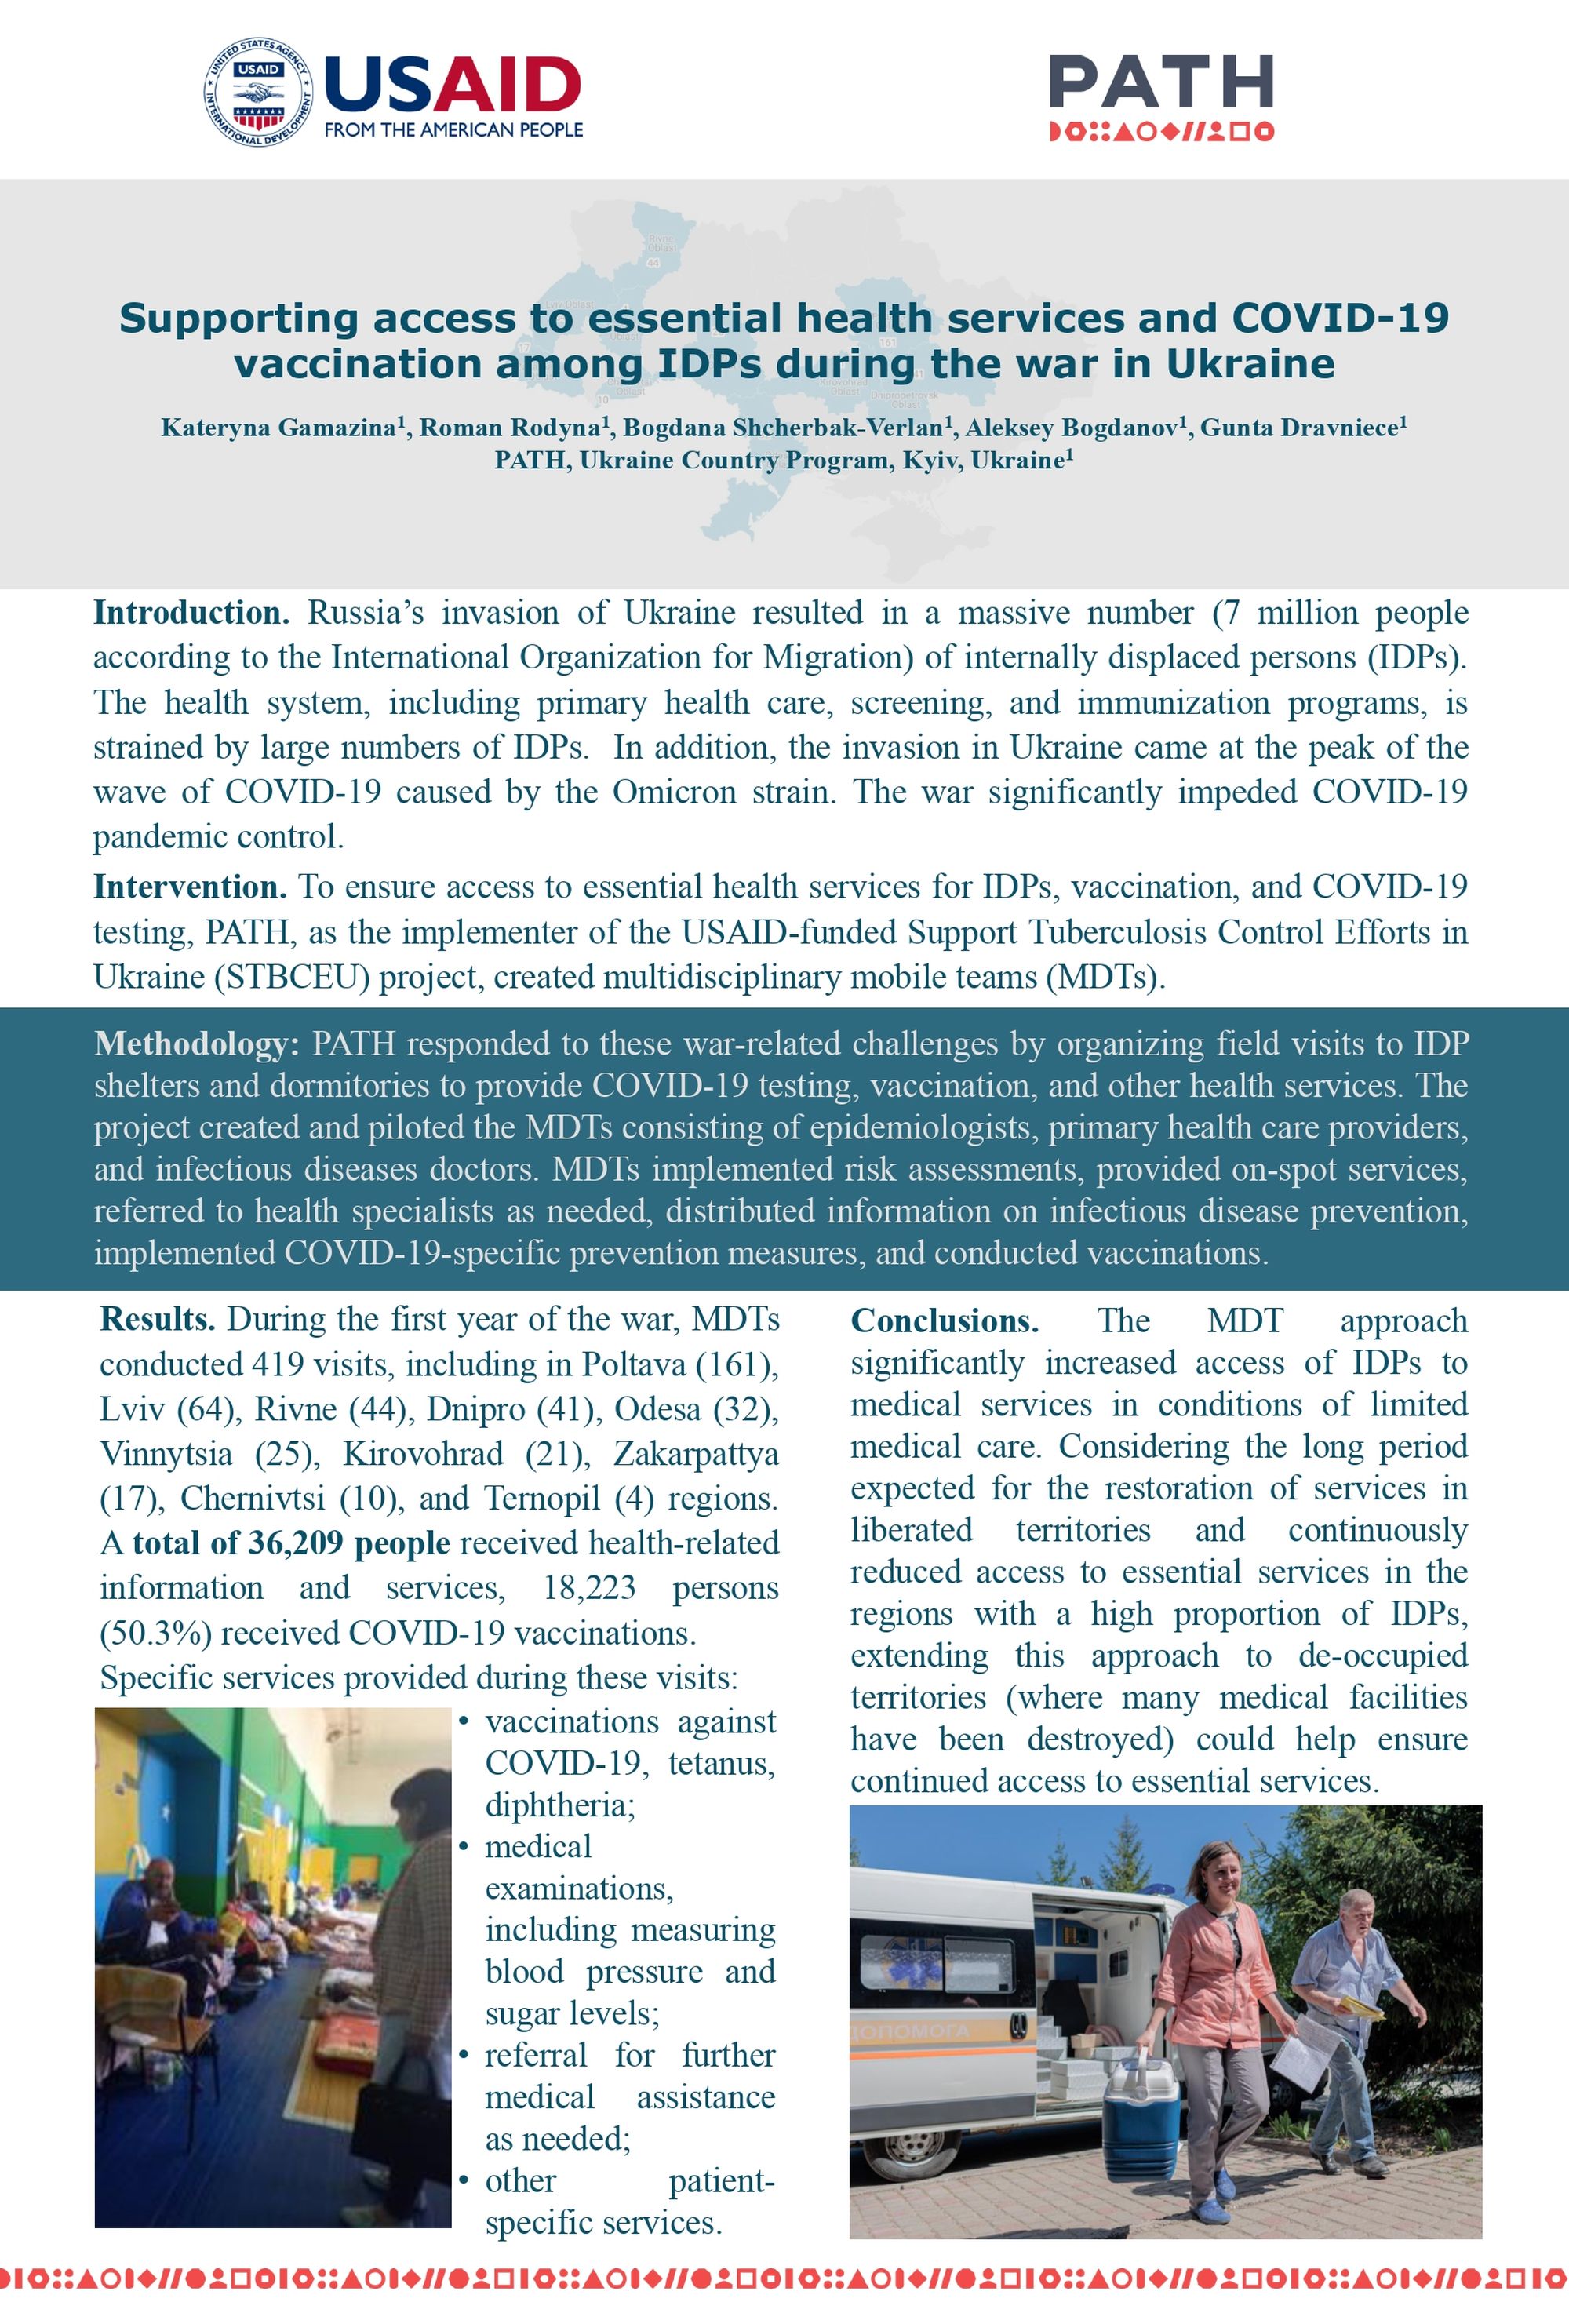 Supporting access to essential health services and COVID-19 vaccination among internally displaced persons in Ukraine during the war